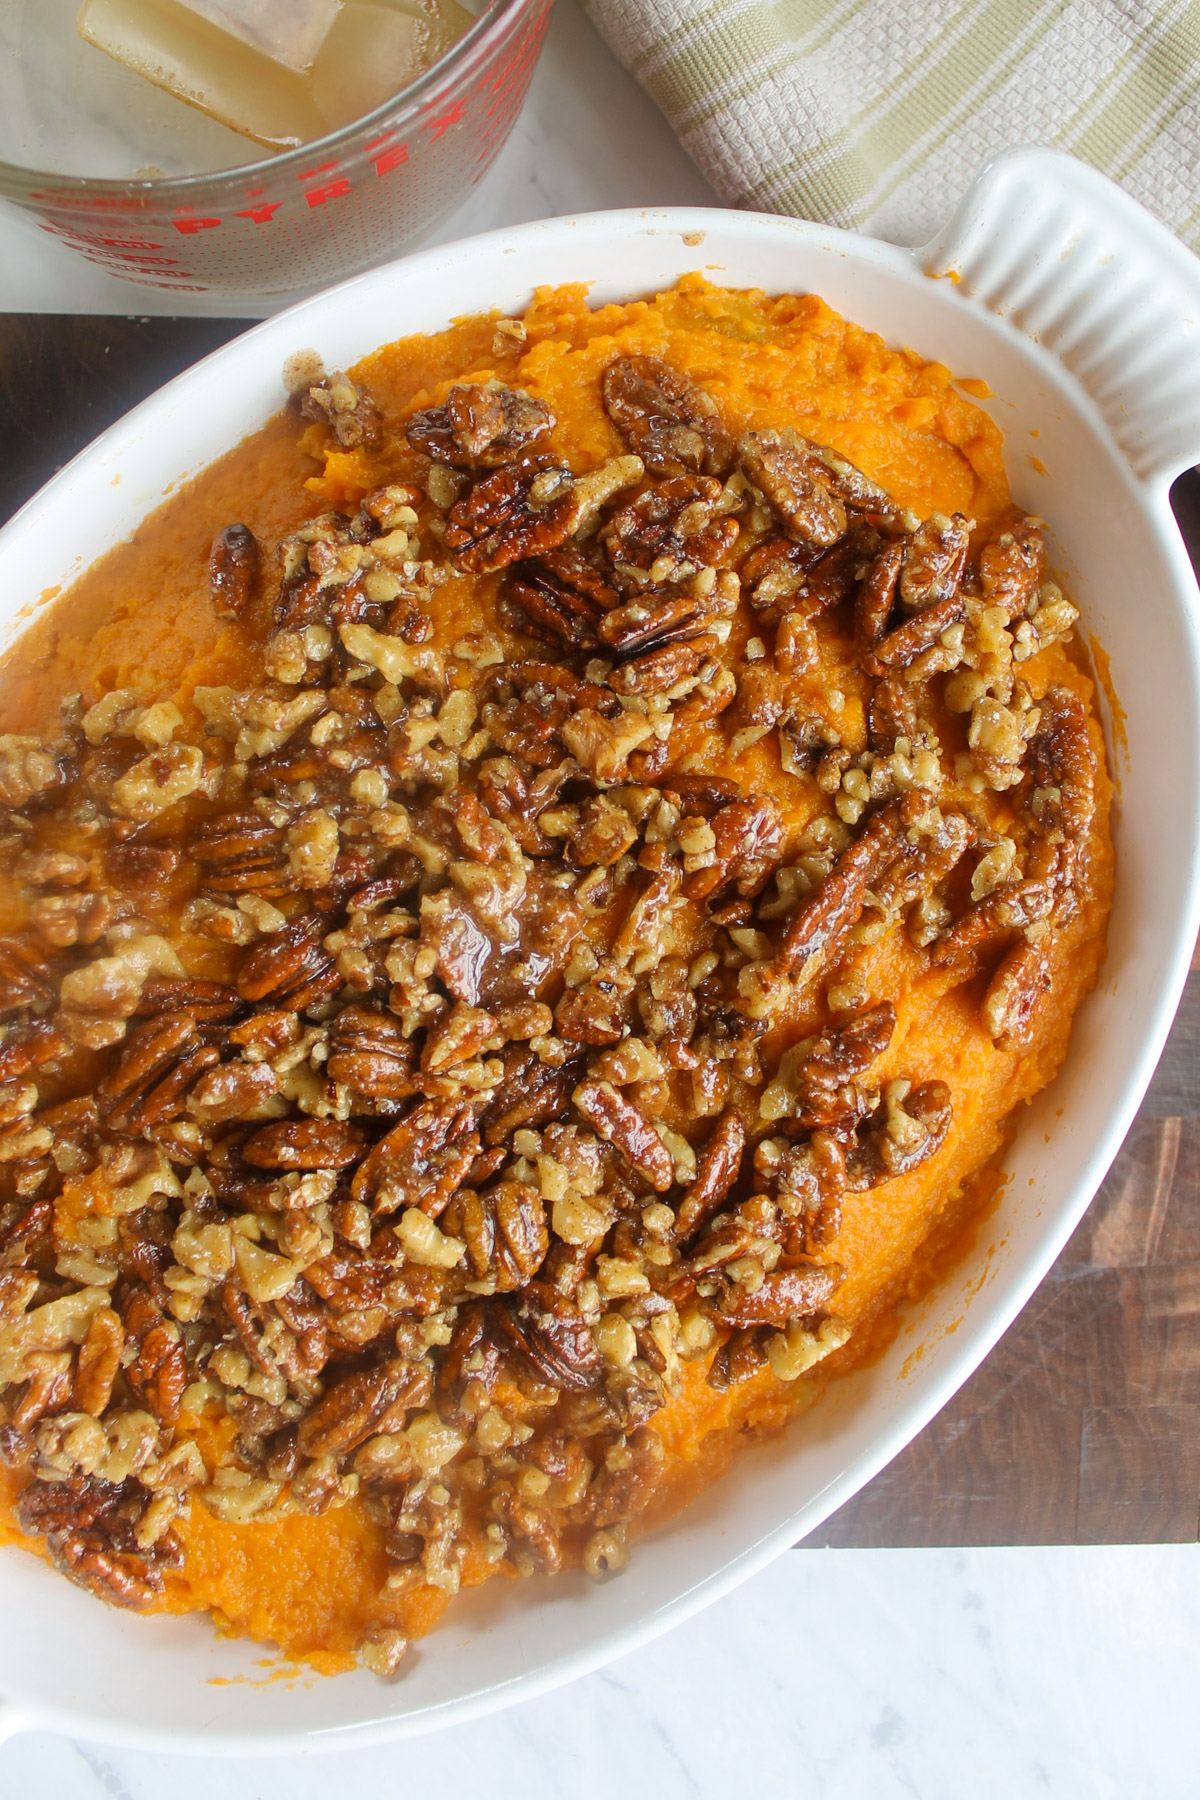 Maple pecan topping over the dish of sweet potatoes ready to bake.